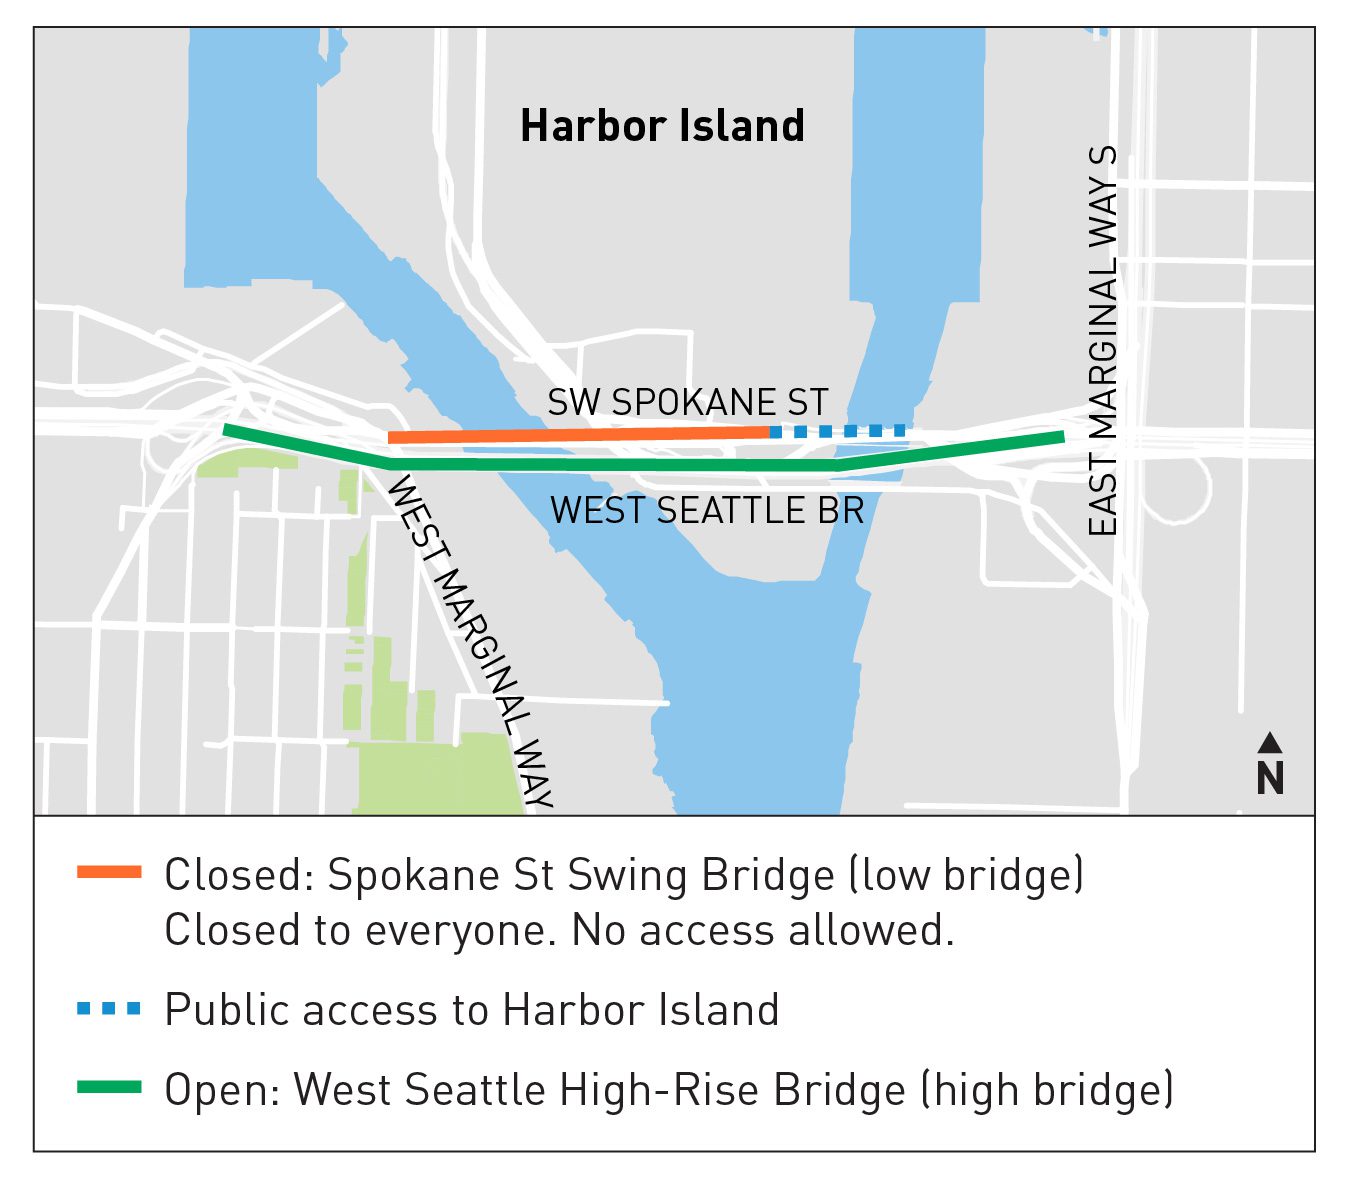 Map graphic showing the bridge closure. The closed low bridge is shown in orange. Public access to Harbor Island is shown in dashed blue. The open high bridge is shown in green.